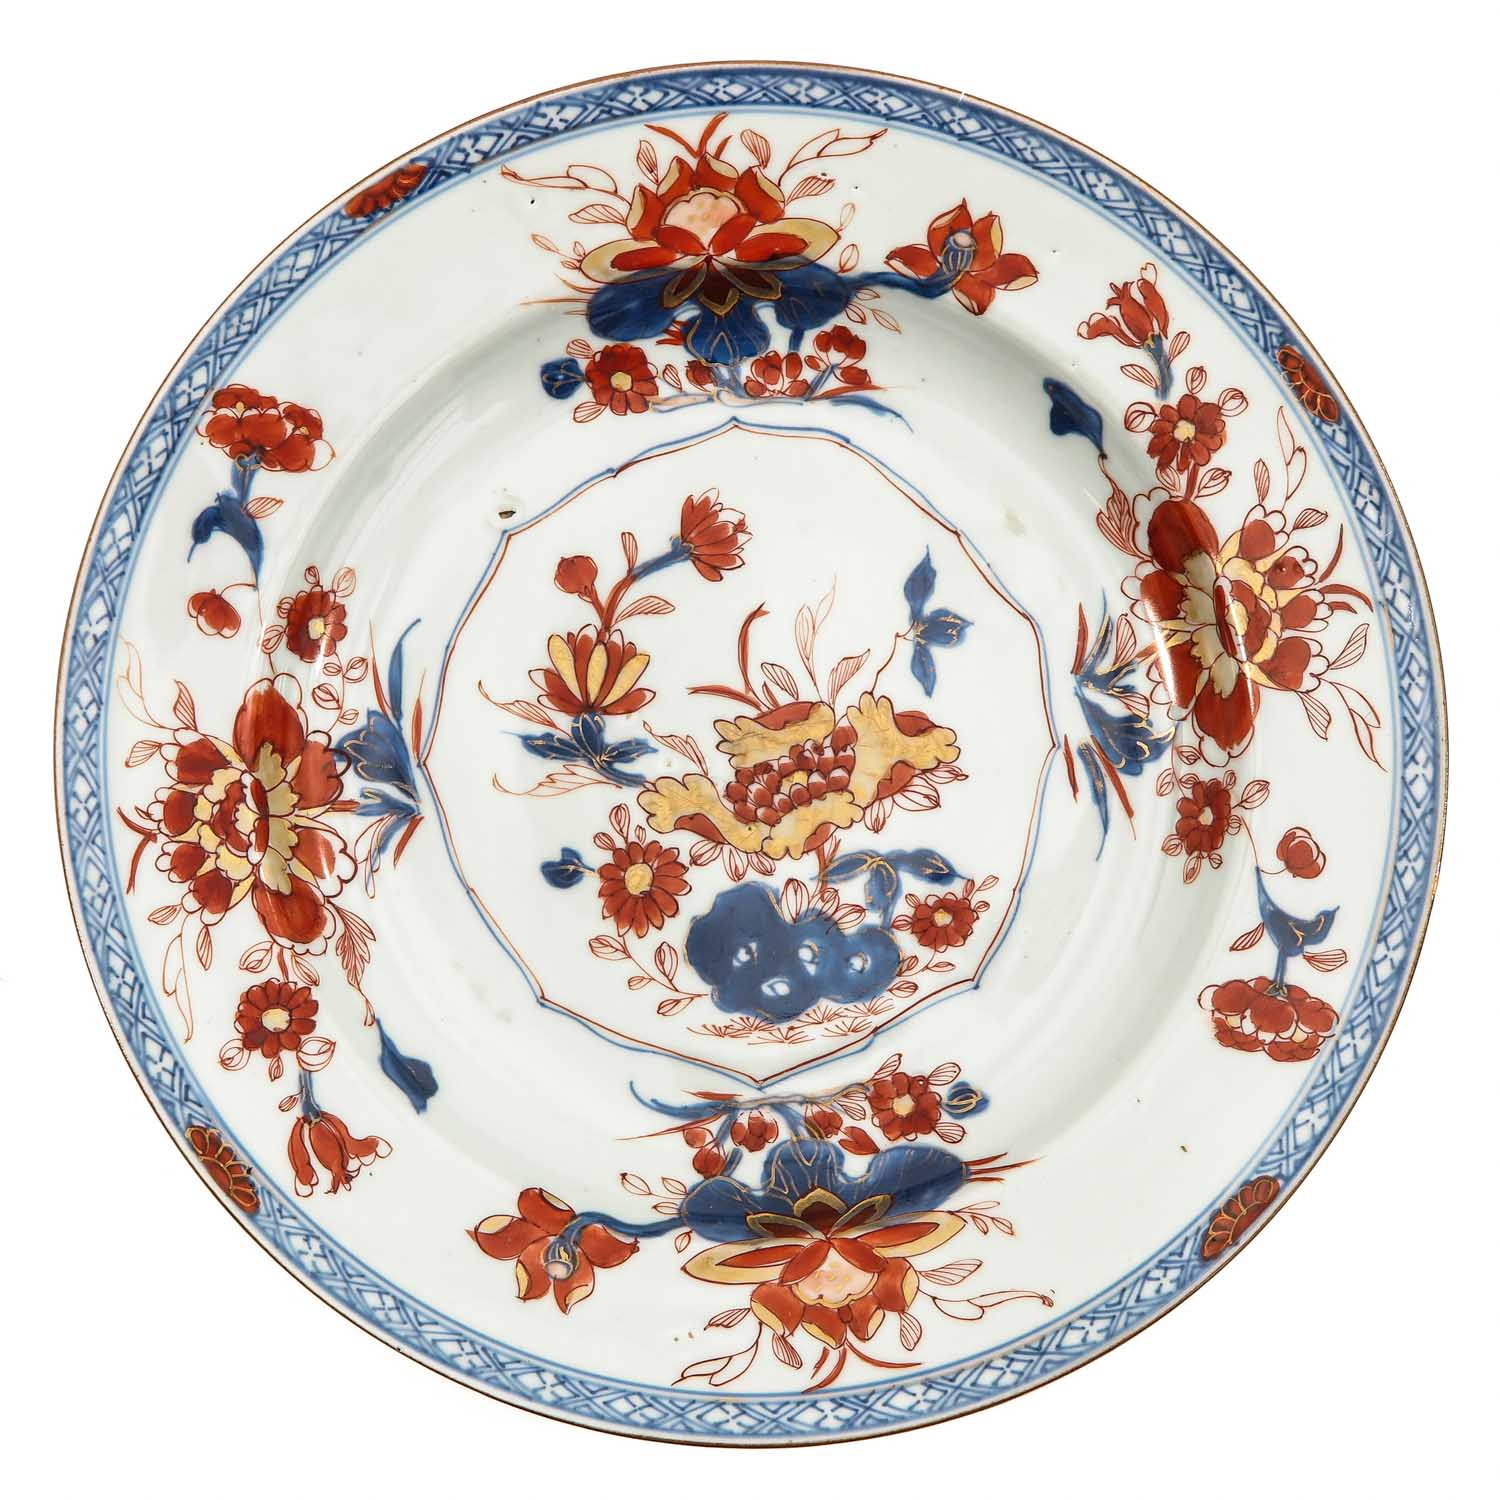 A Collection of 3 Imari Plates - Image 3 of 10